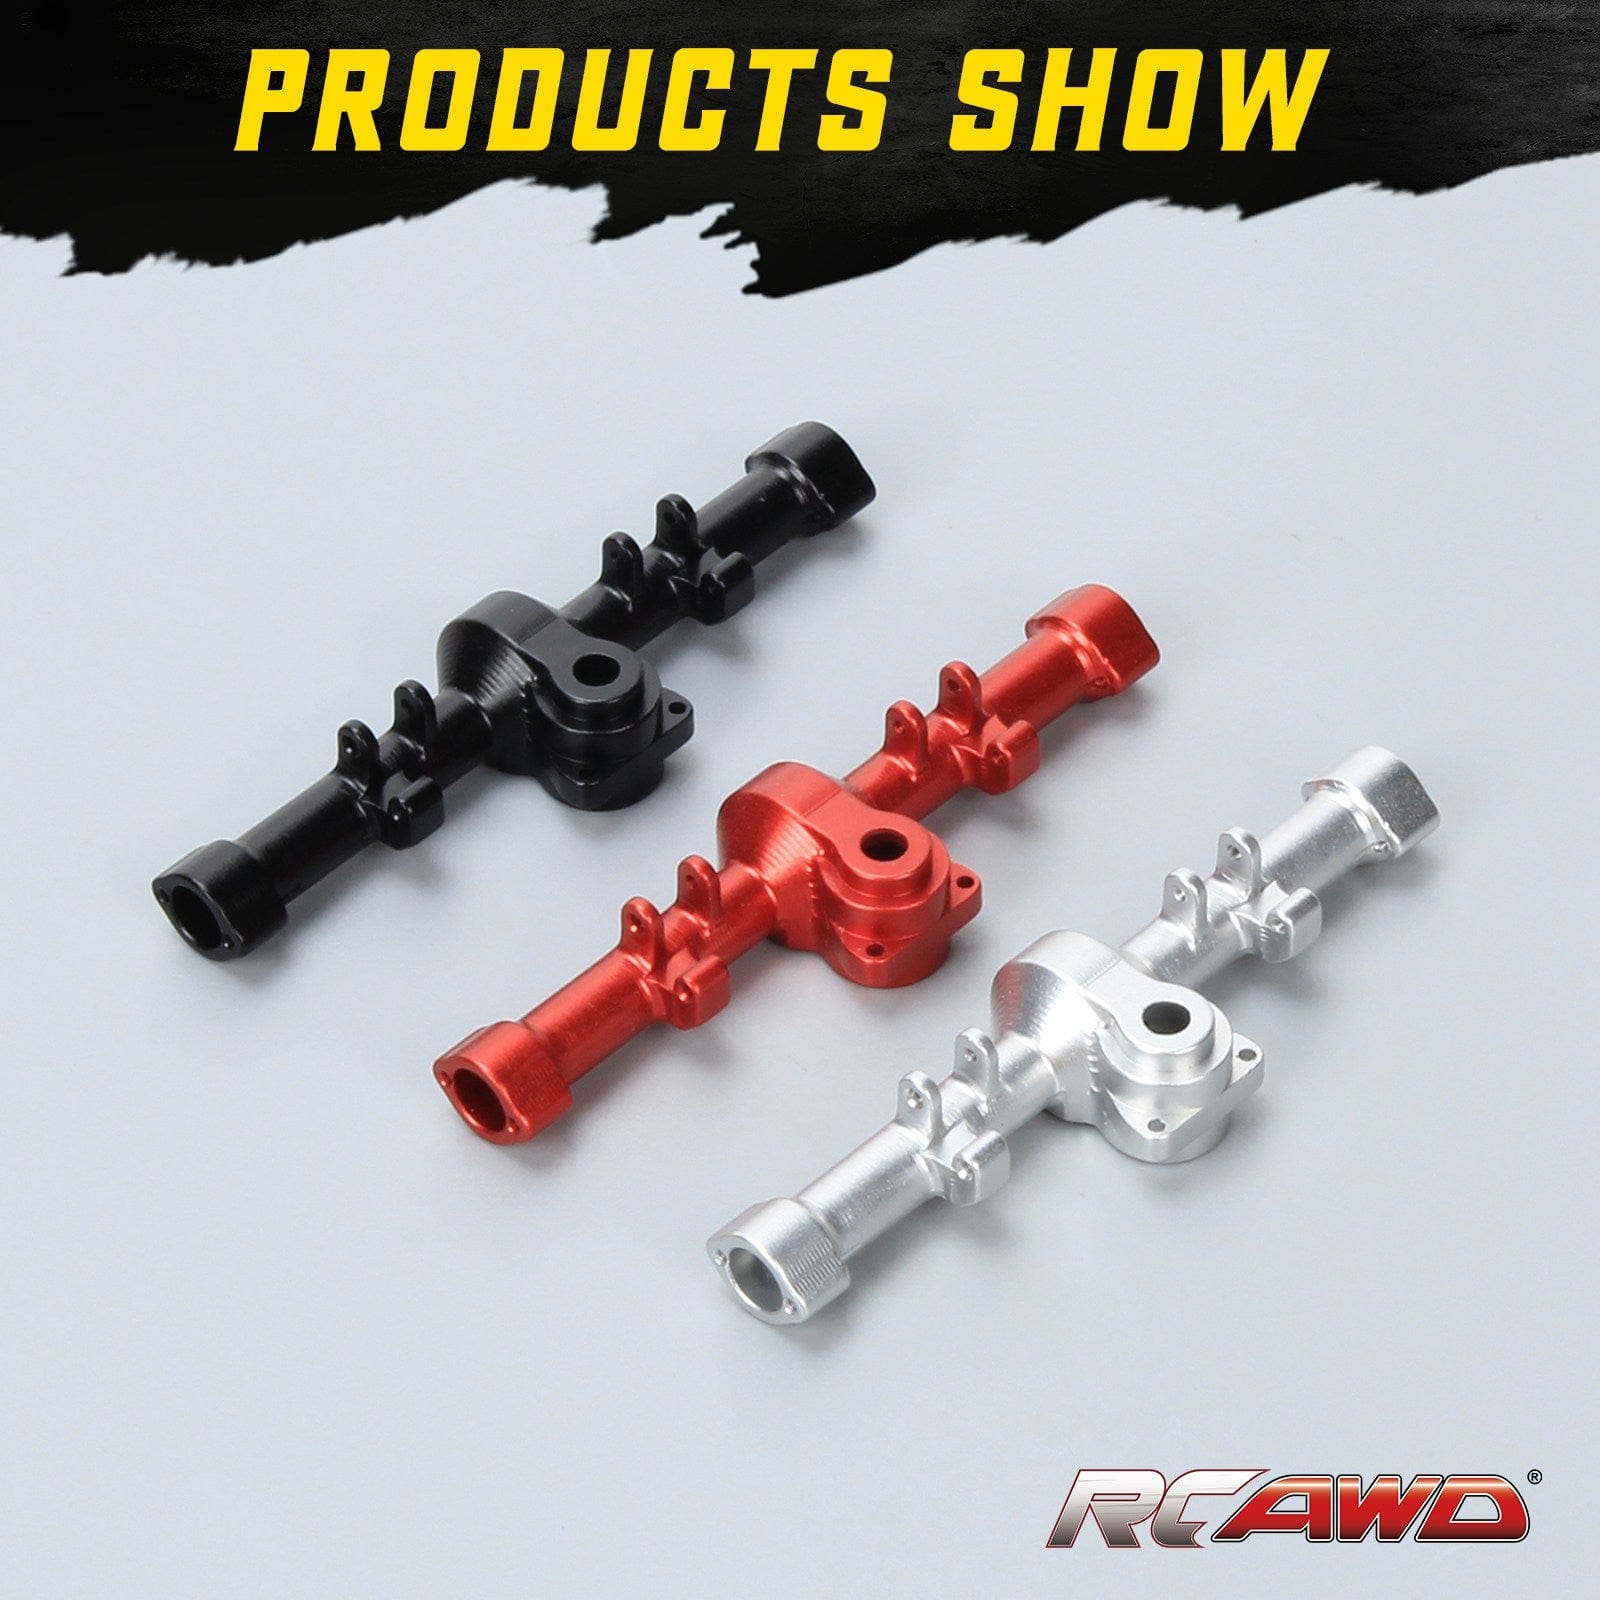 RCAWD RCAWD 1/24 Axial SCX24 Upgrades Aluminum alloy rear axle housing w/o gears SCX2456